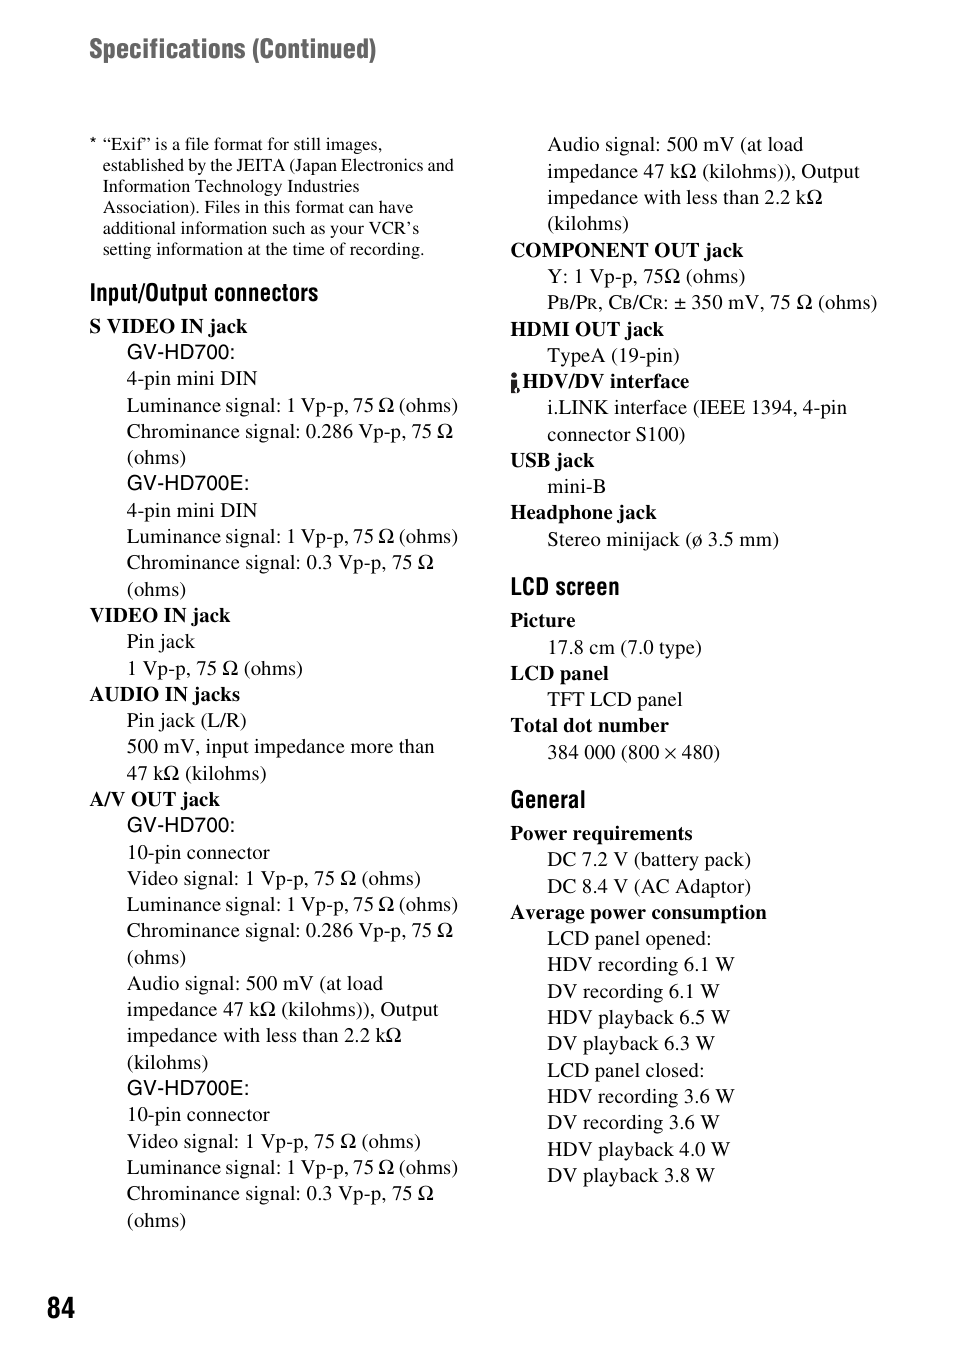 Specifications (continued) | Sony GV-HD700 User Manual | Page 84 / 108